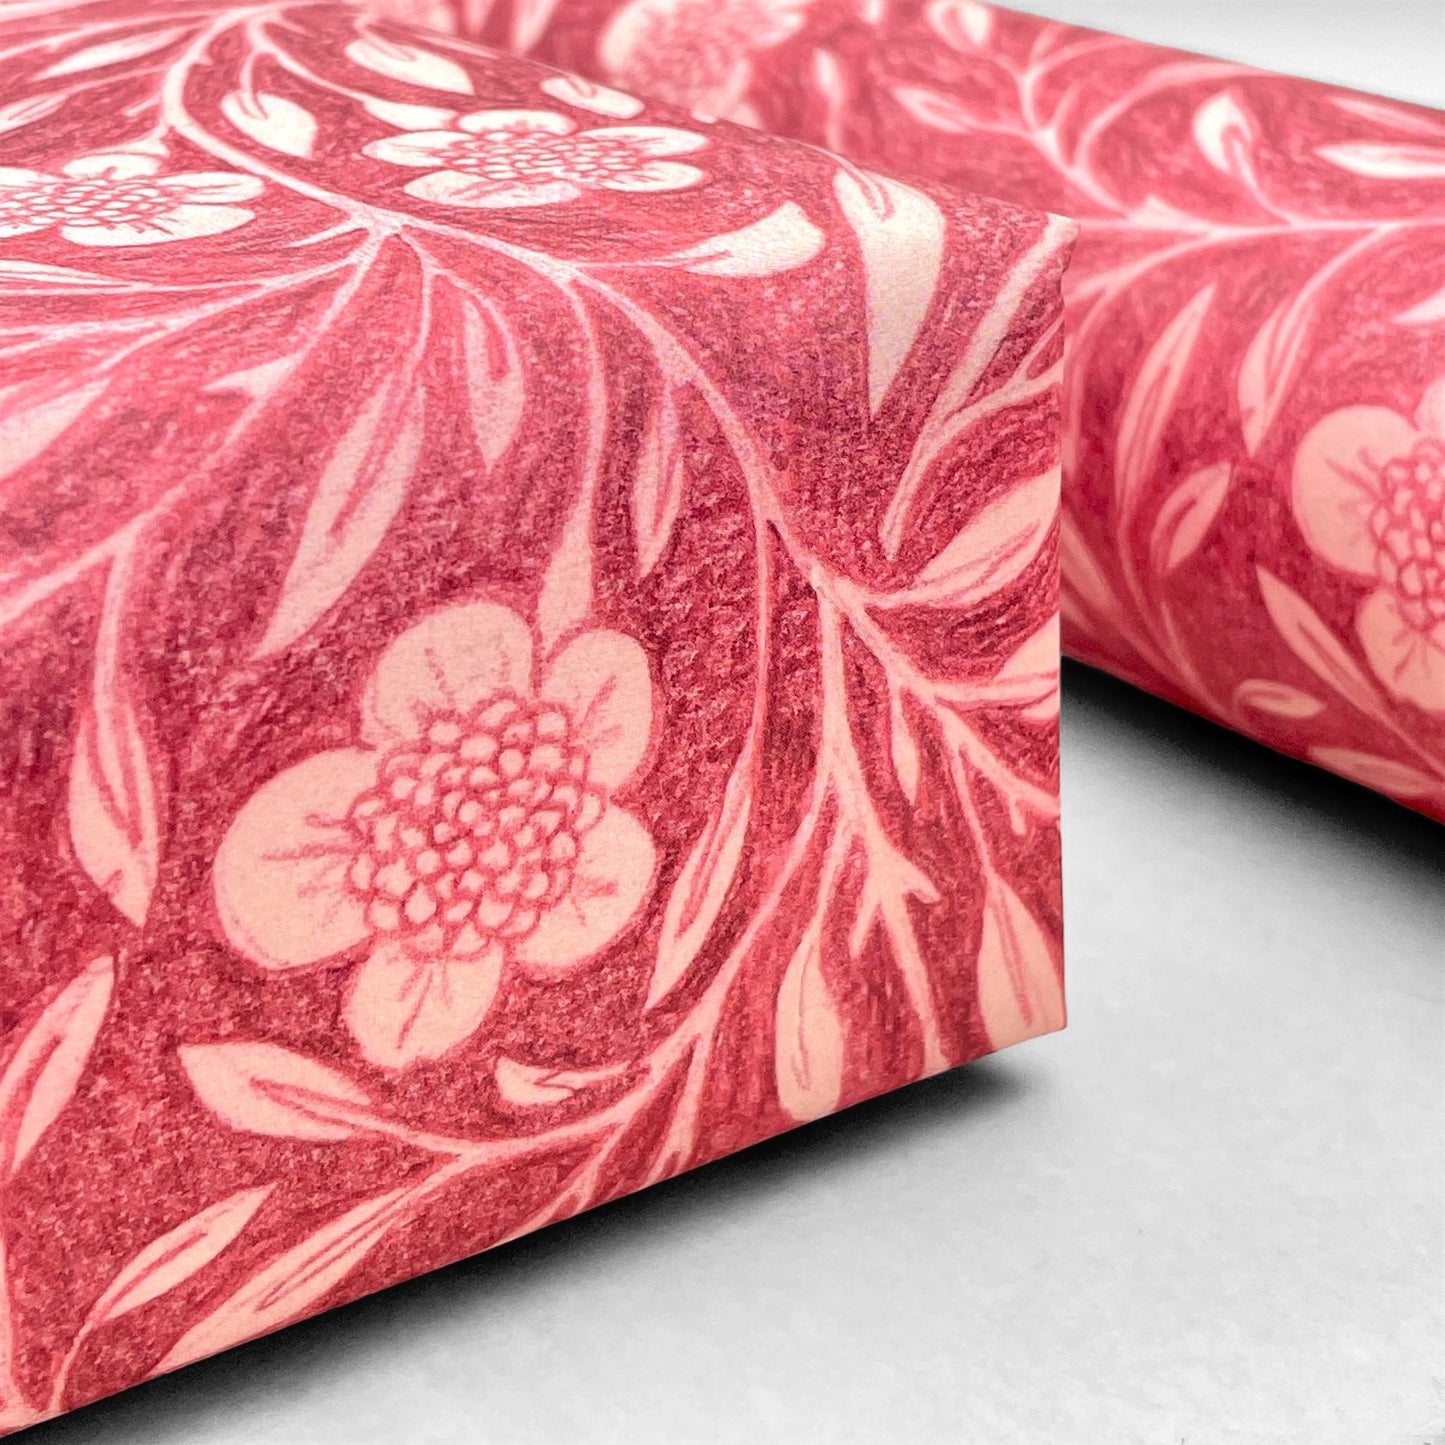 patterned paper / gift wrap with a delicate floral pattern in deep pink and white by Wanderlust